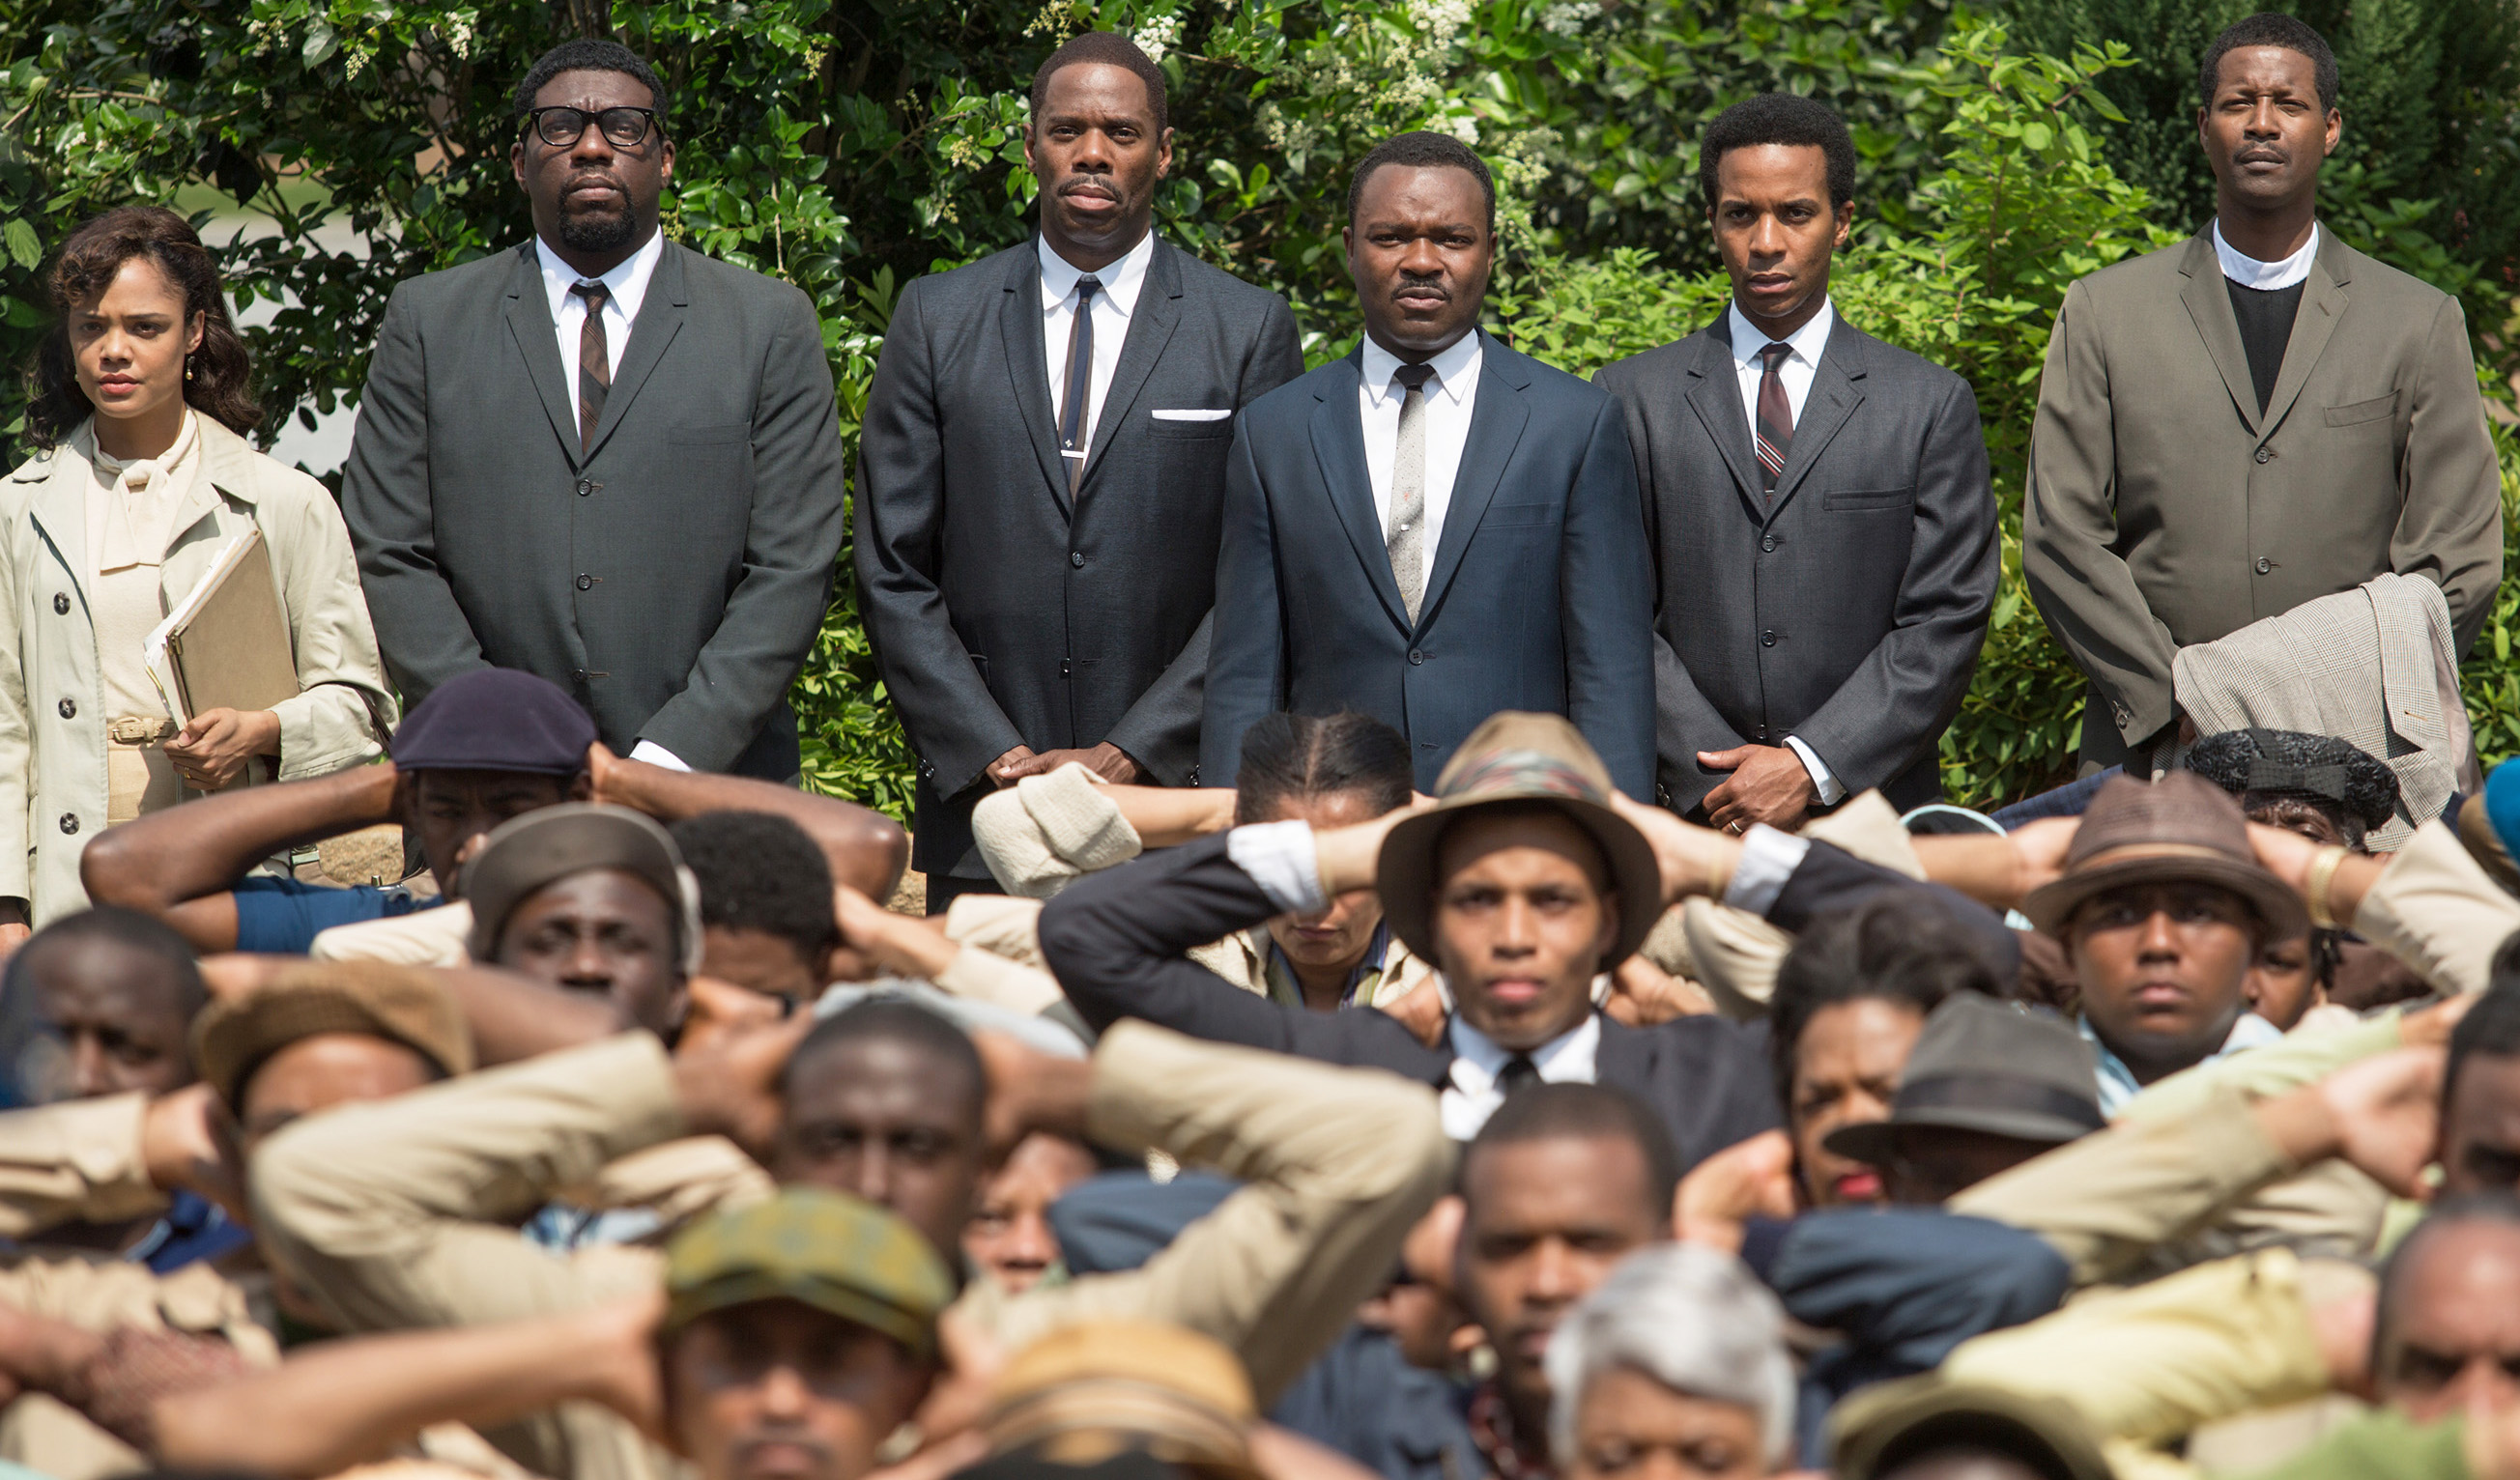 Selma march of 50 years ago was immortalized in the 2015 motion picture of the same name, starring David Oyelowo. 